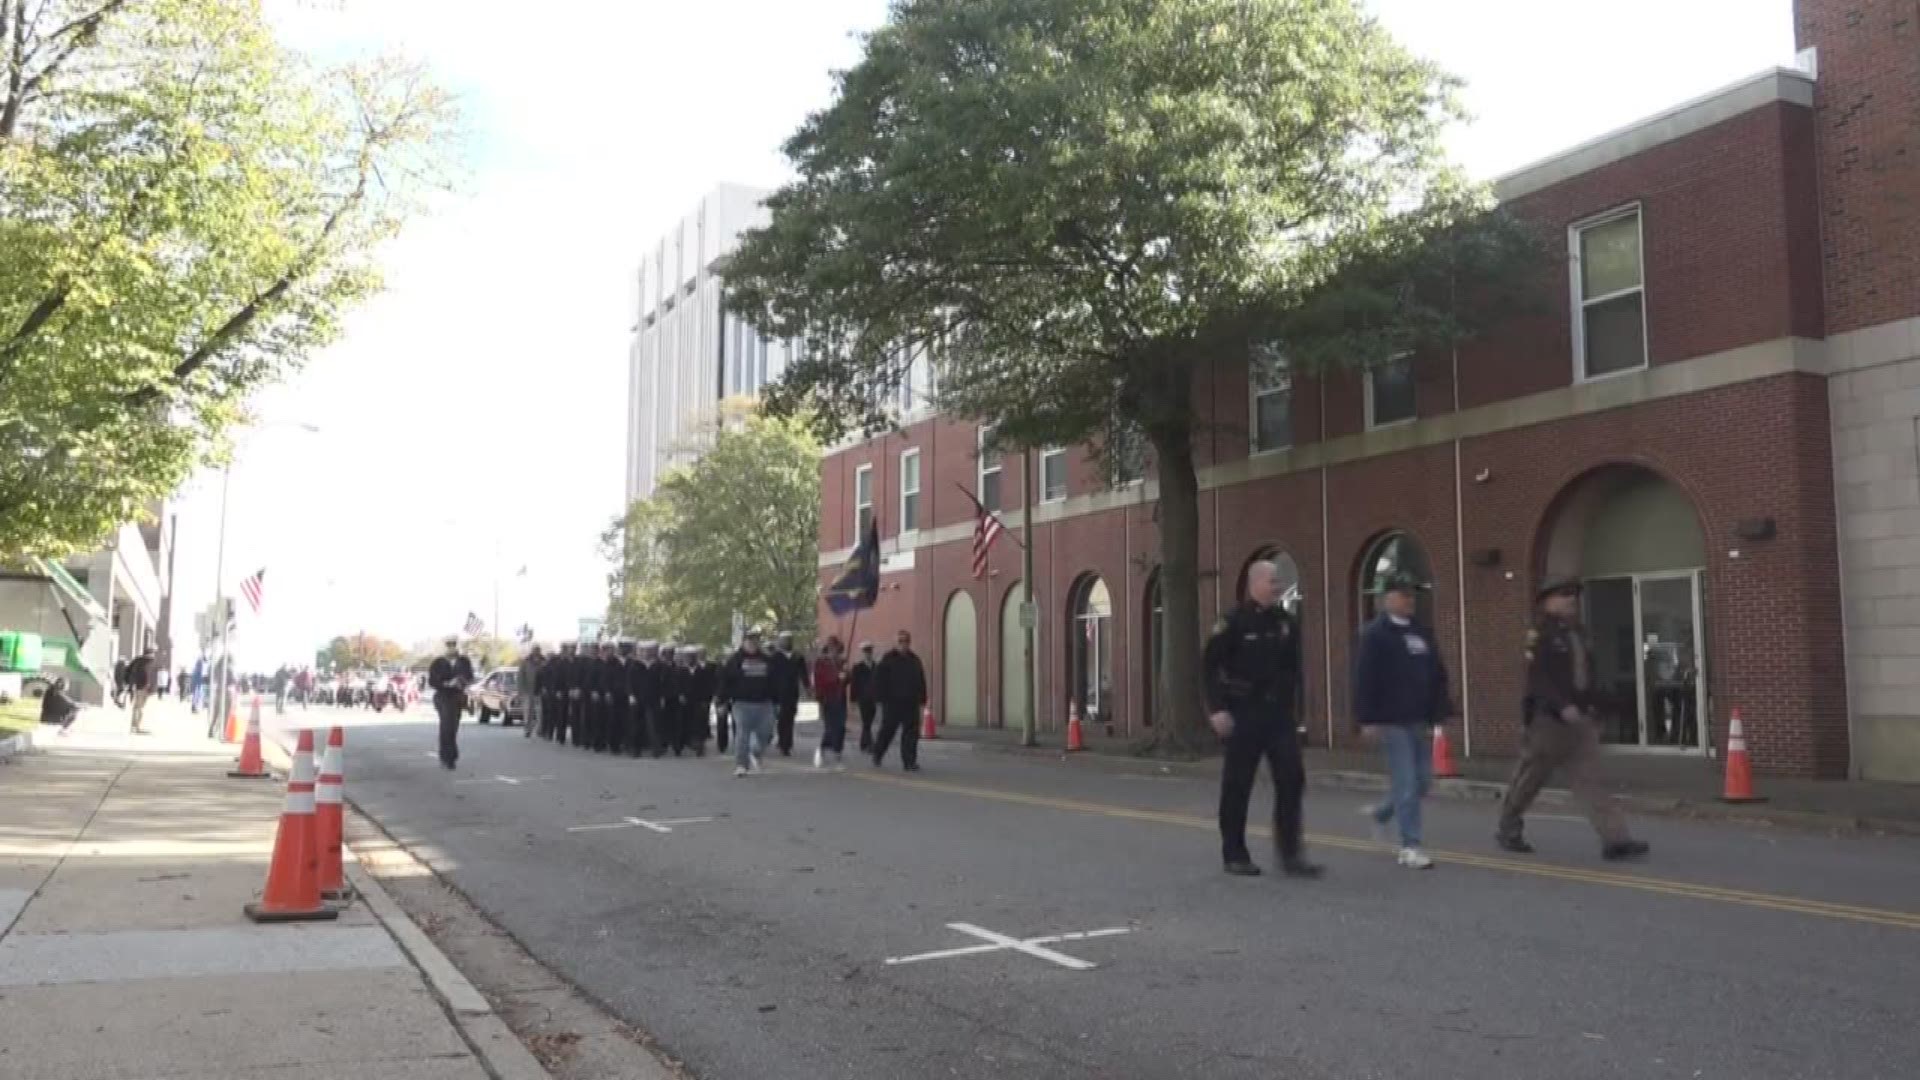 For the first time in more than 50 years, Newport News lined the streets to honor veterans. The hope is to get more people involved with the parade in the future.